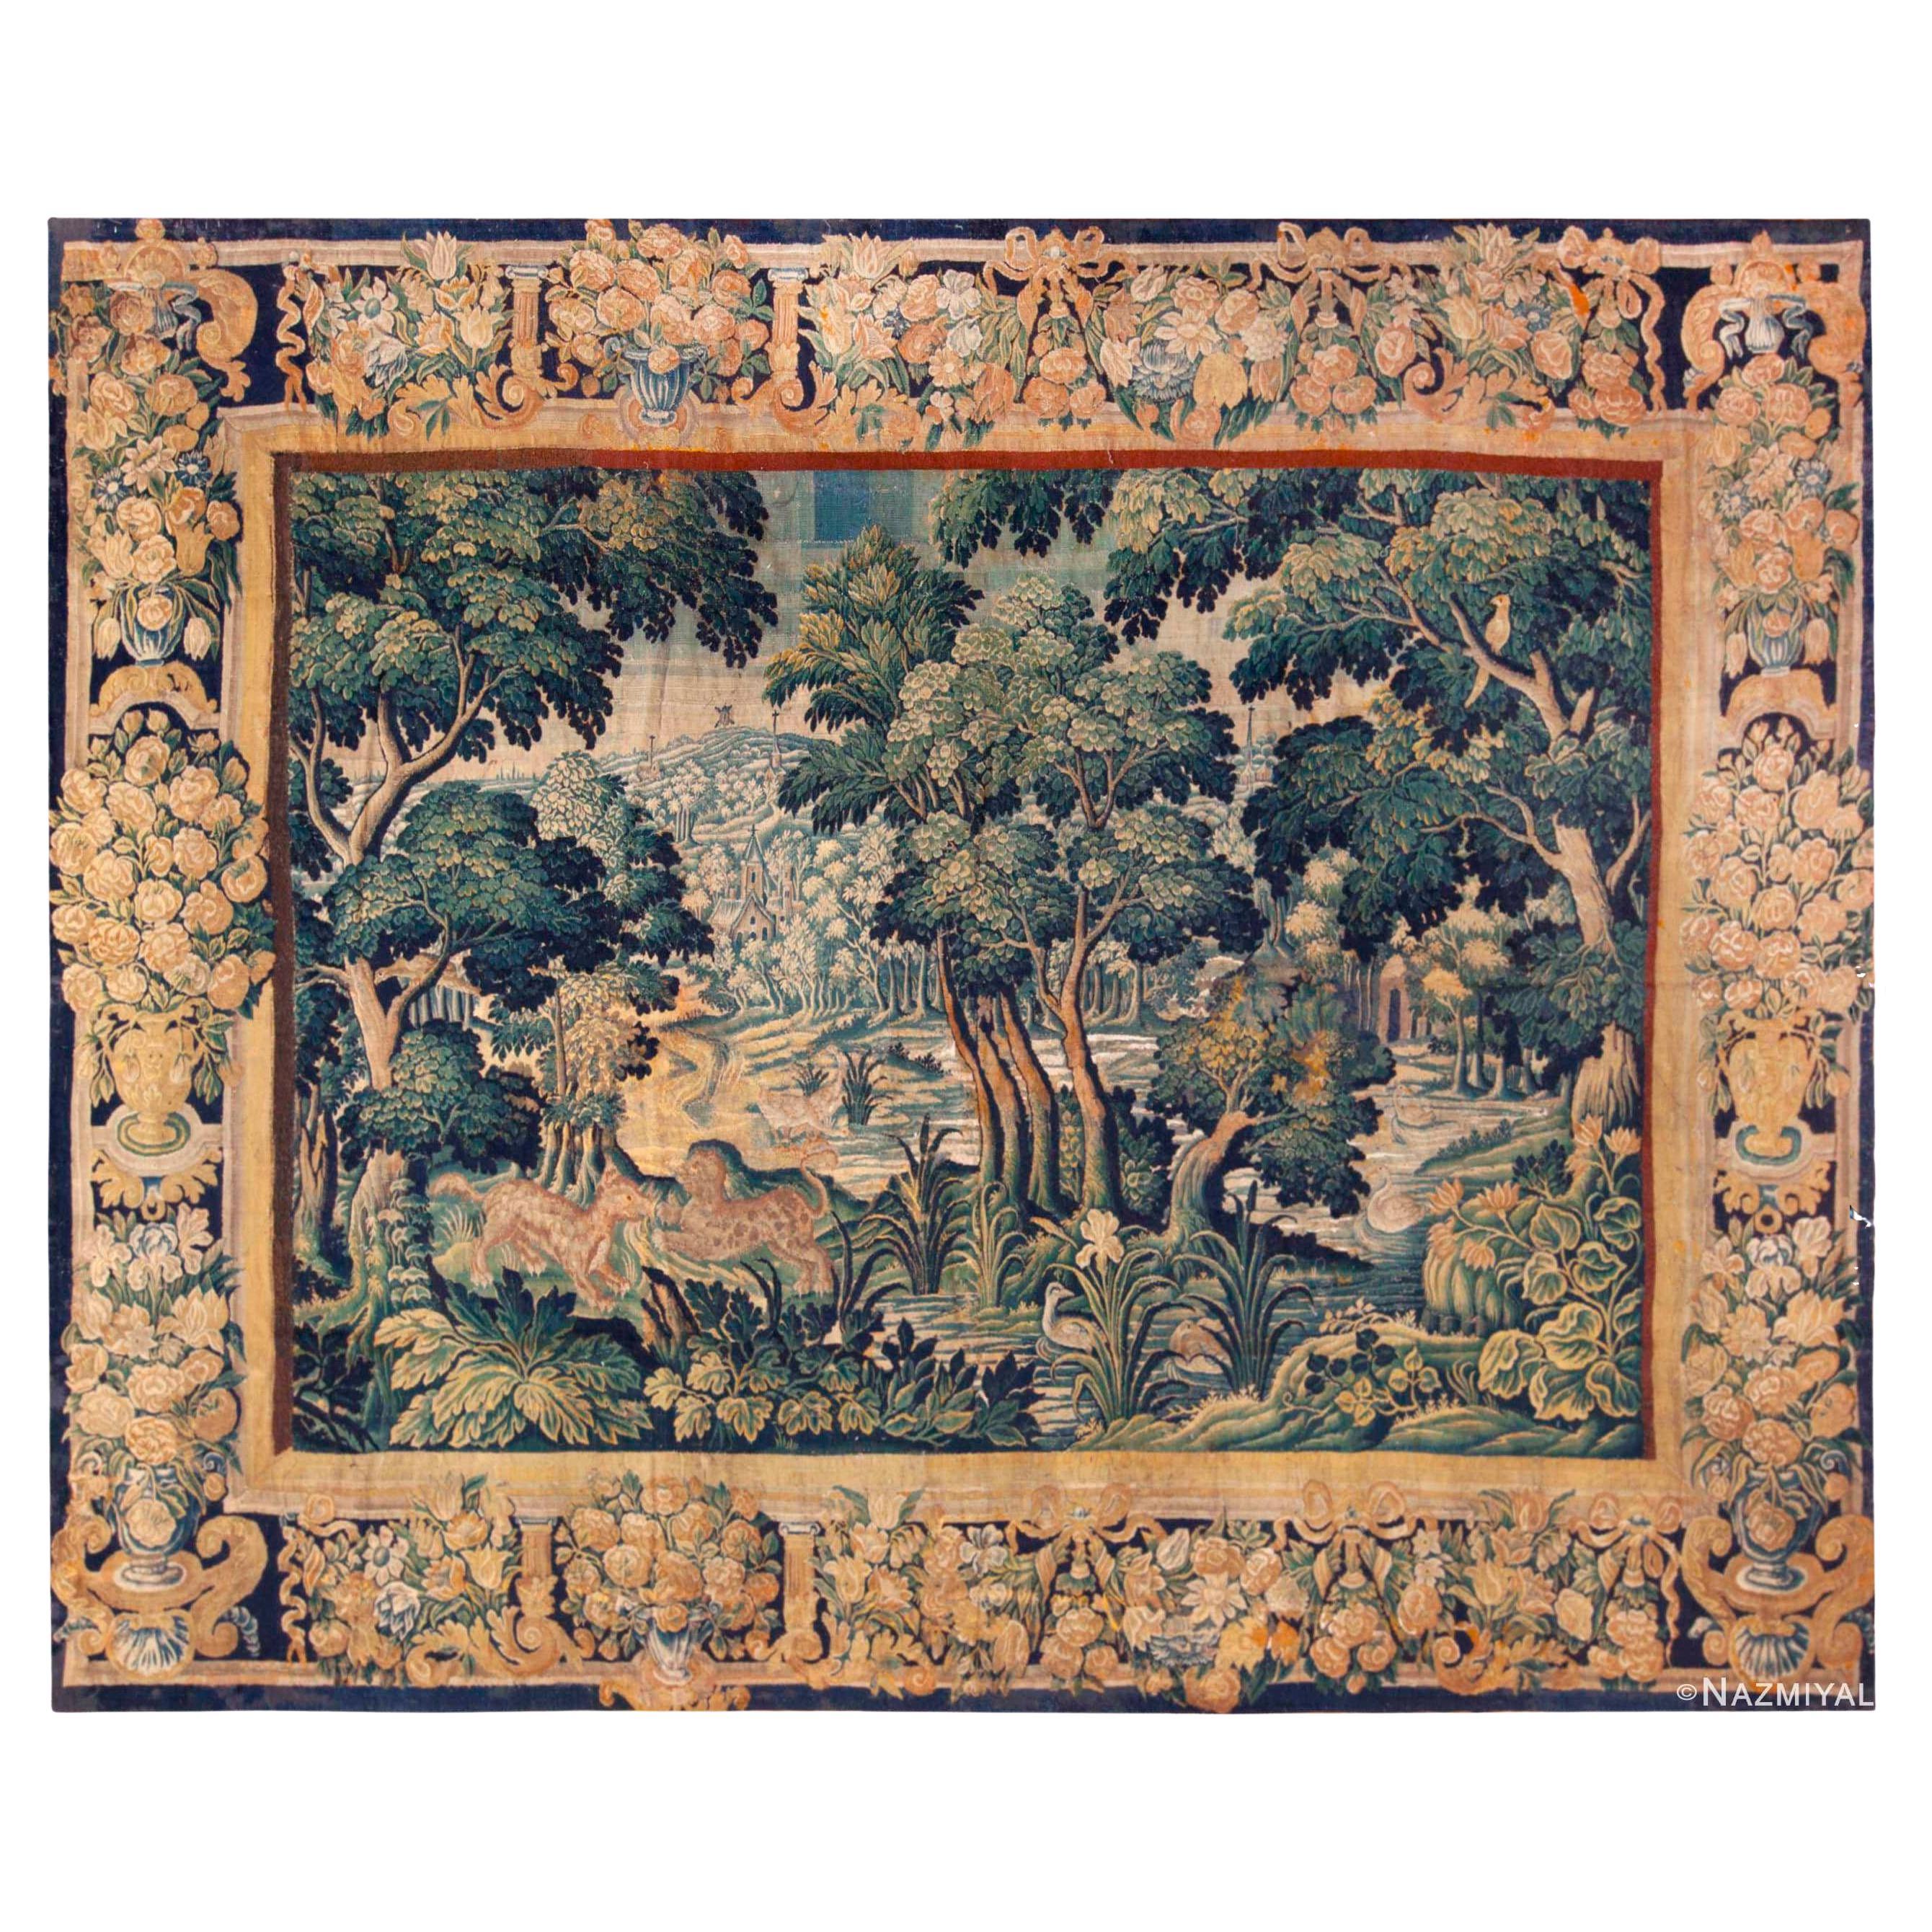 Amazing 17th Century Antique French Silk And Wool Verdure Tapestry 10' x 12'10"